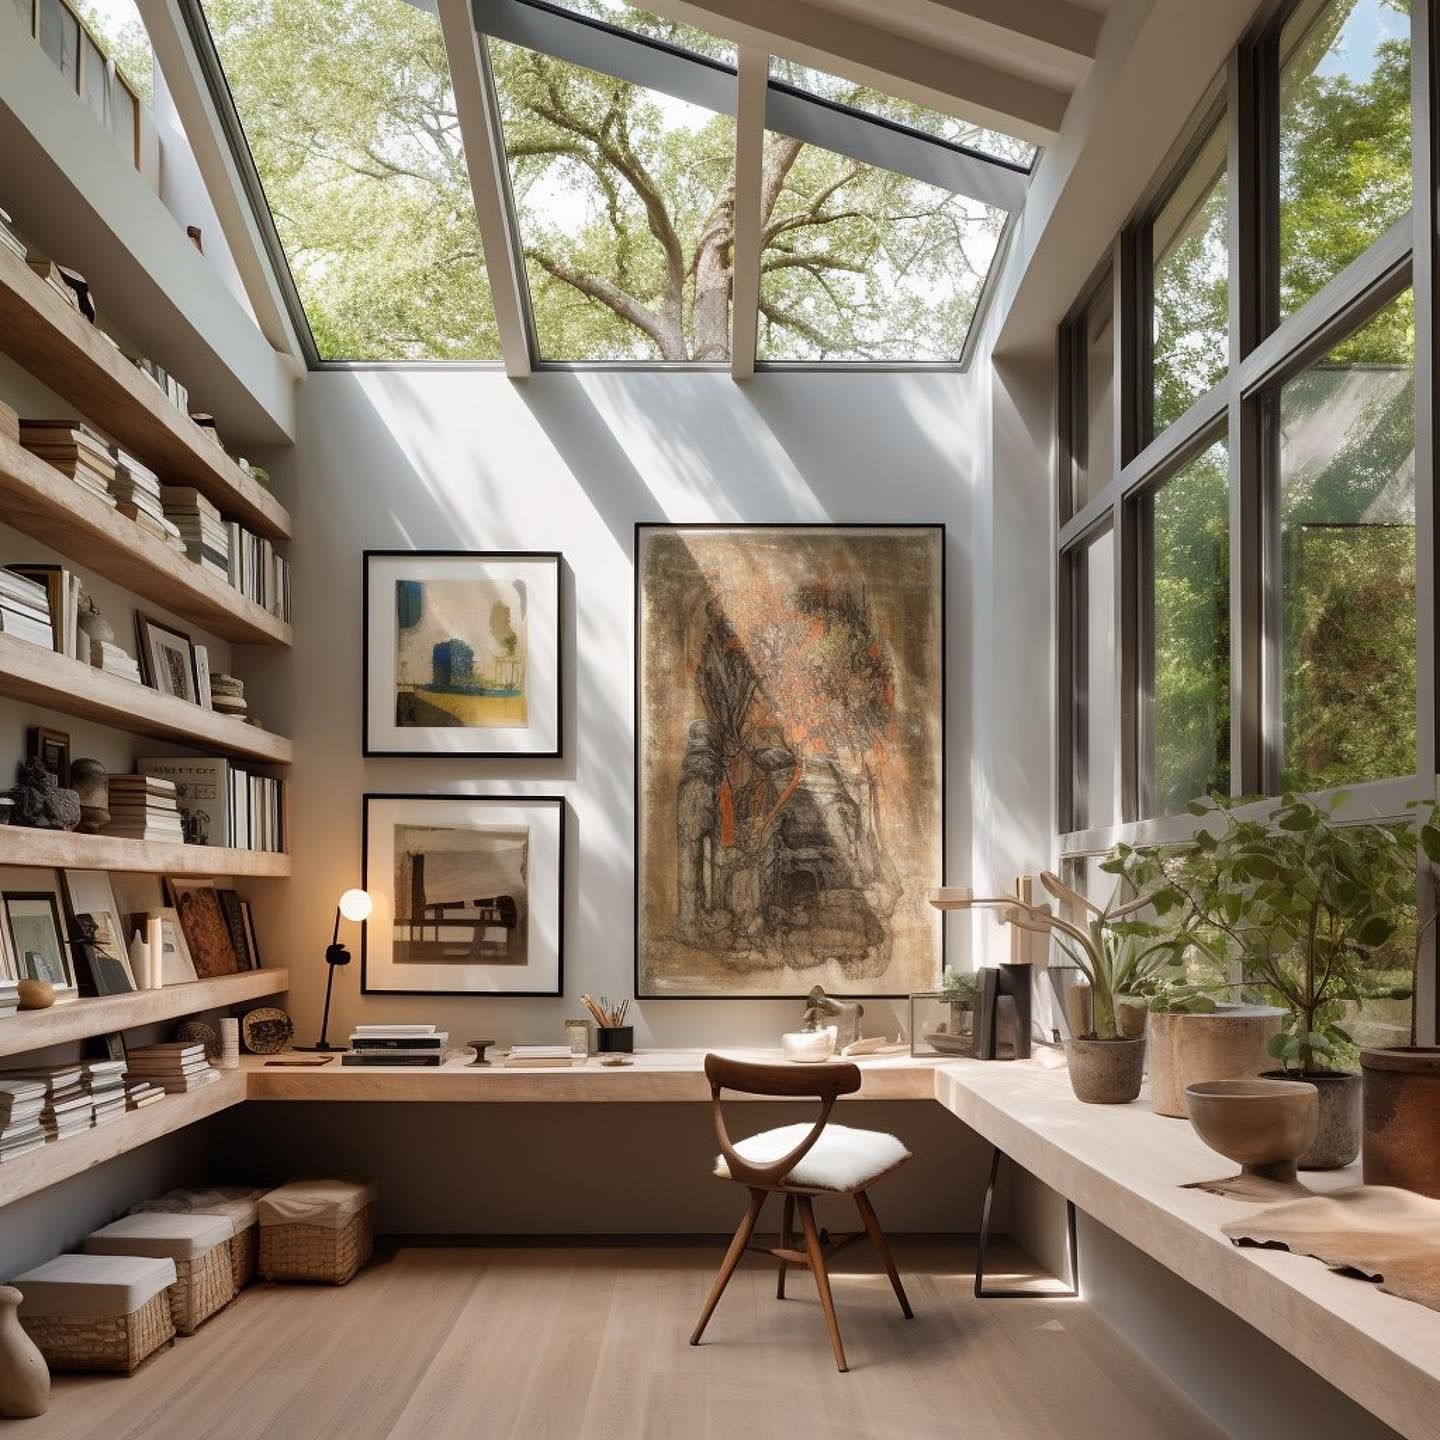 The Art of Crafting Interior Spaces: A Look at Architecture Interior Design